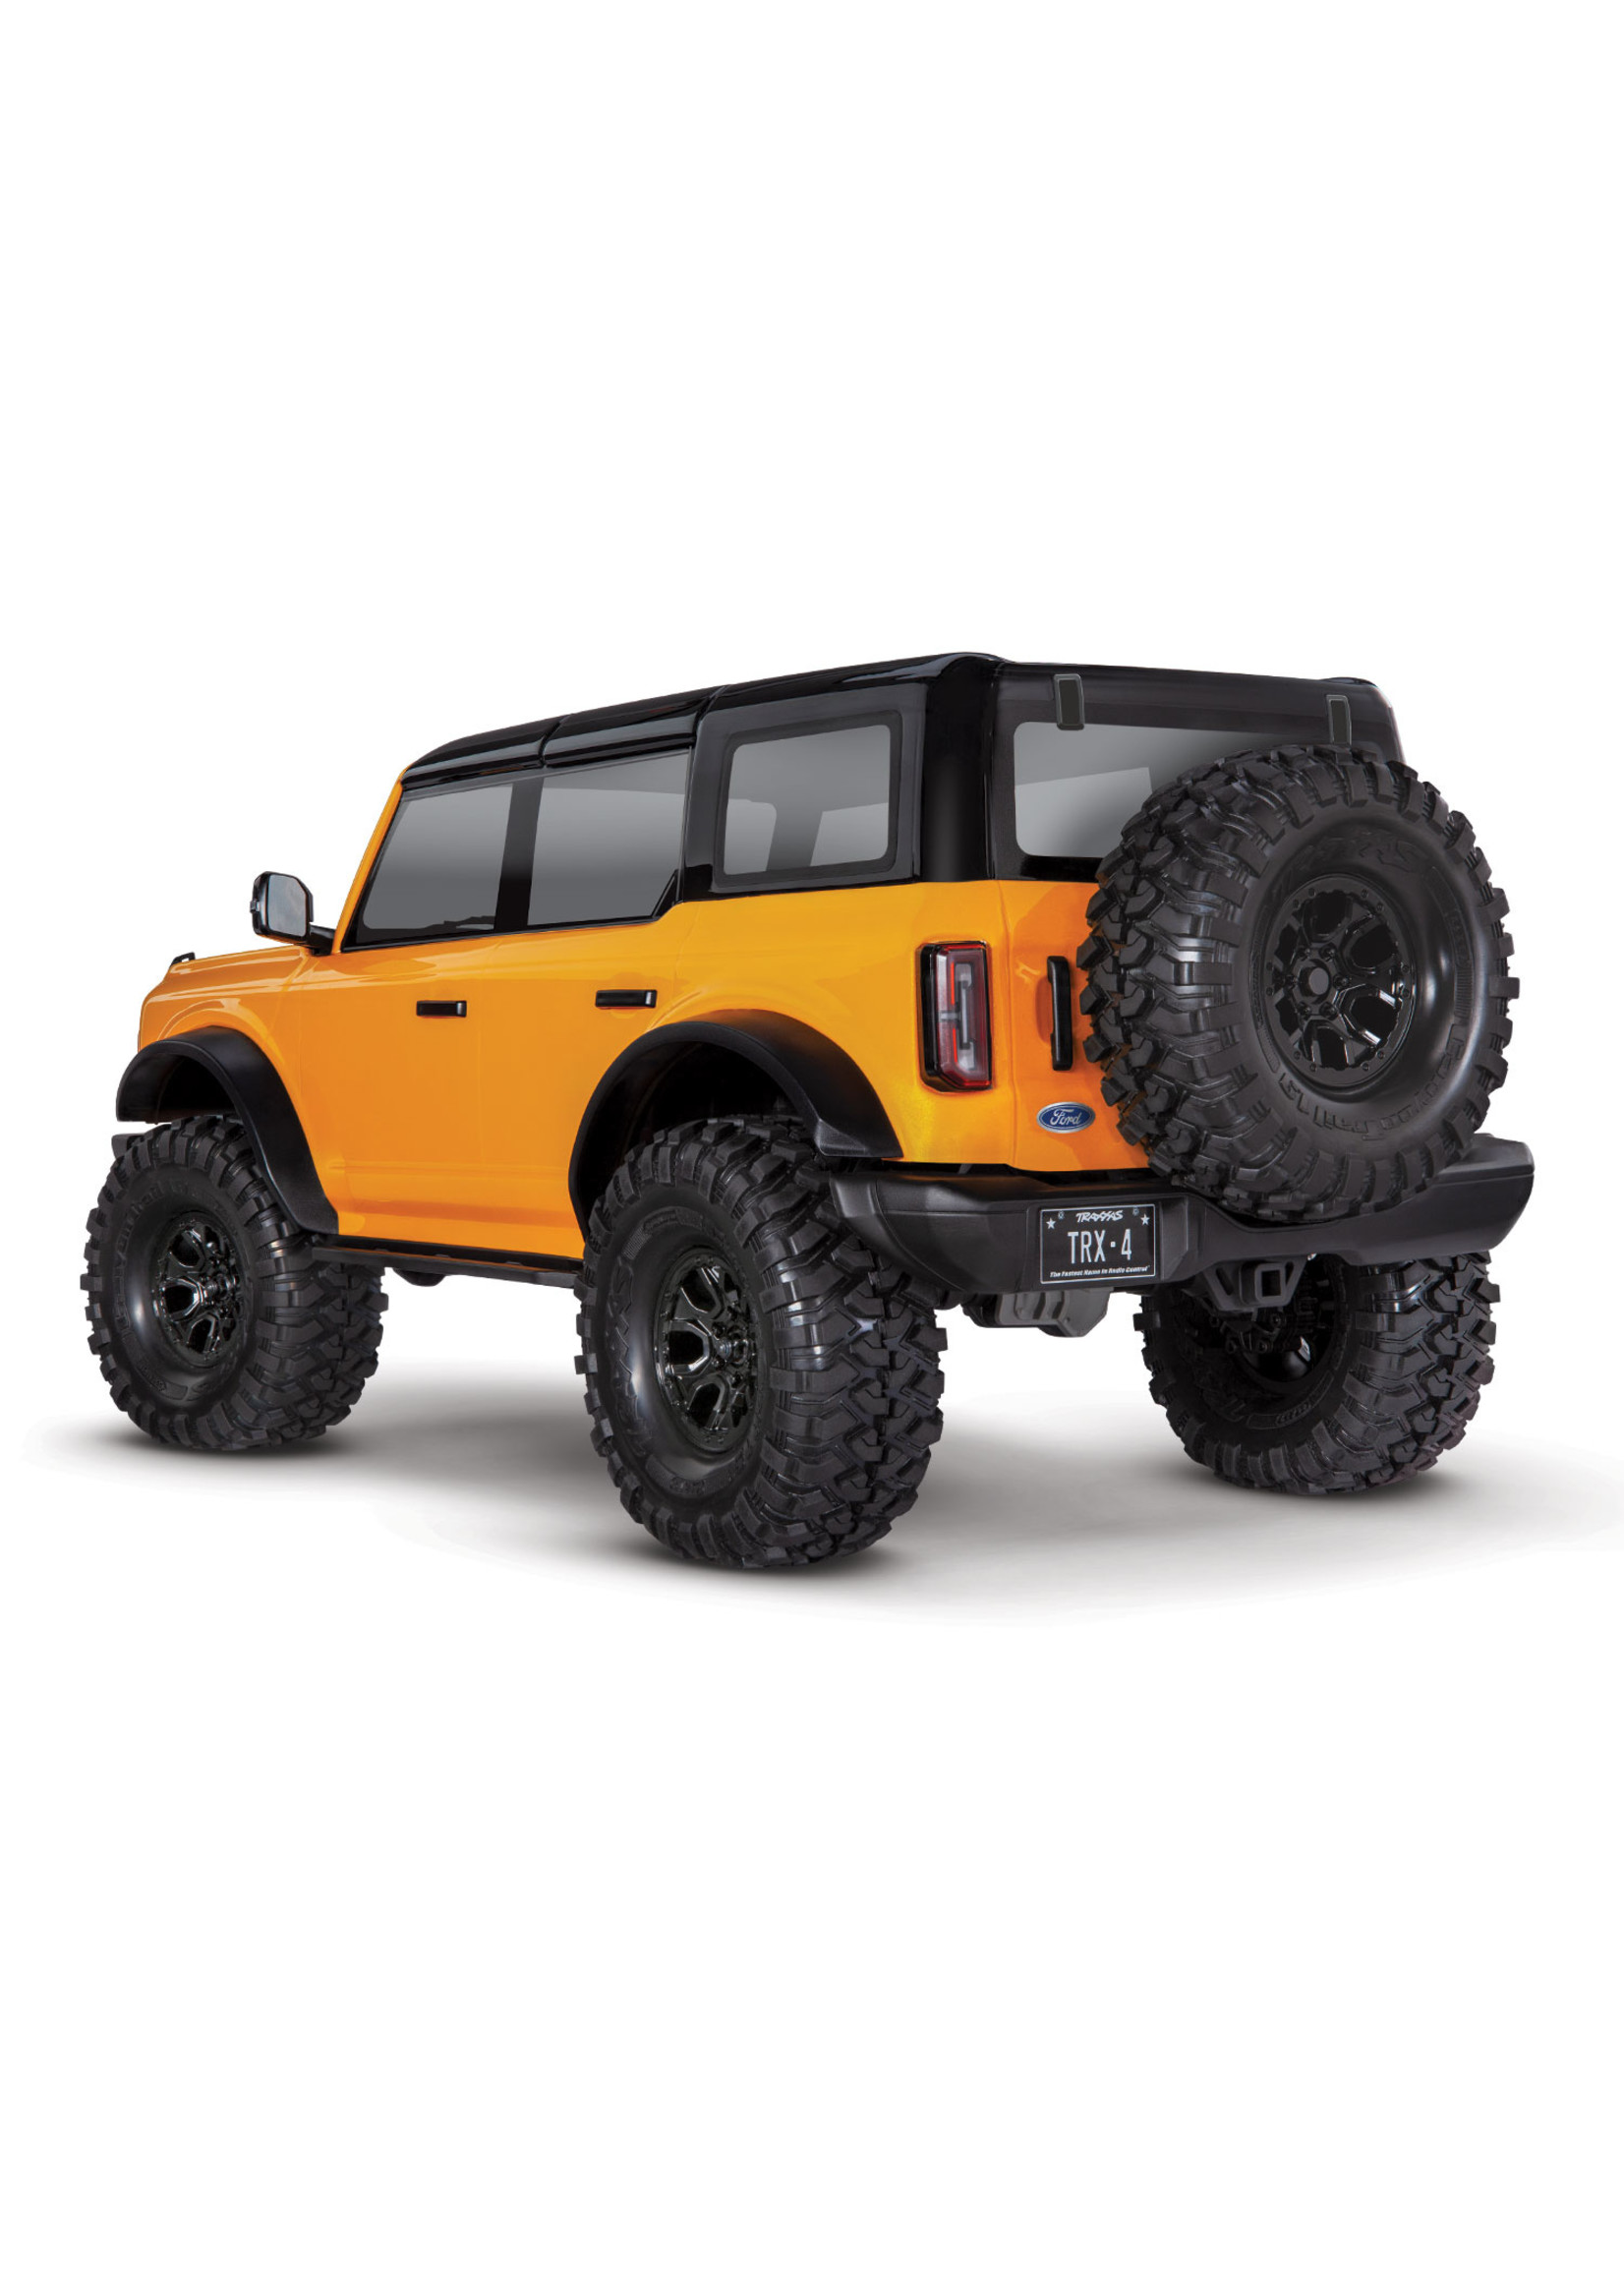 Traxxas Trx-4 Scale And Trail� Crawler With 2021 Ford� Bronco Body: Cyber  Orange 92076-4-ORG 